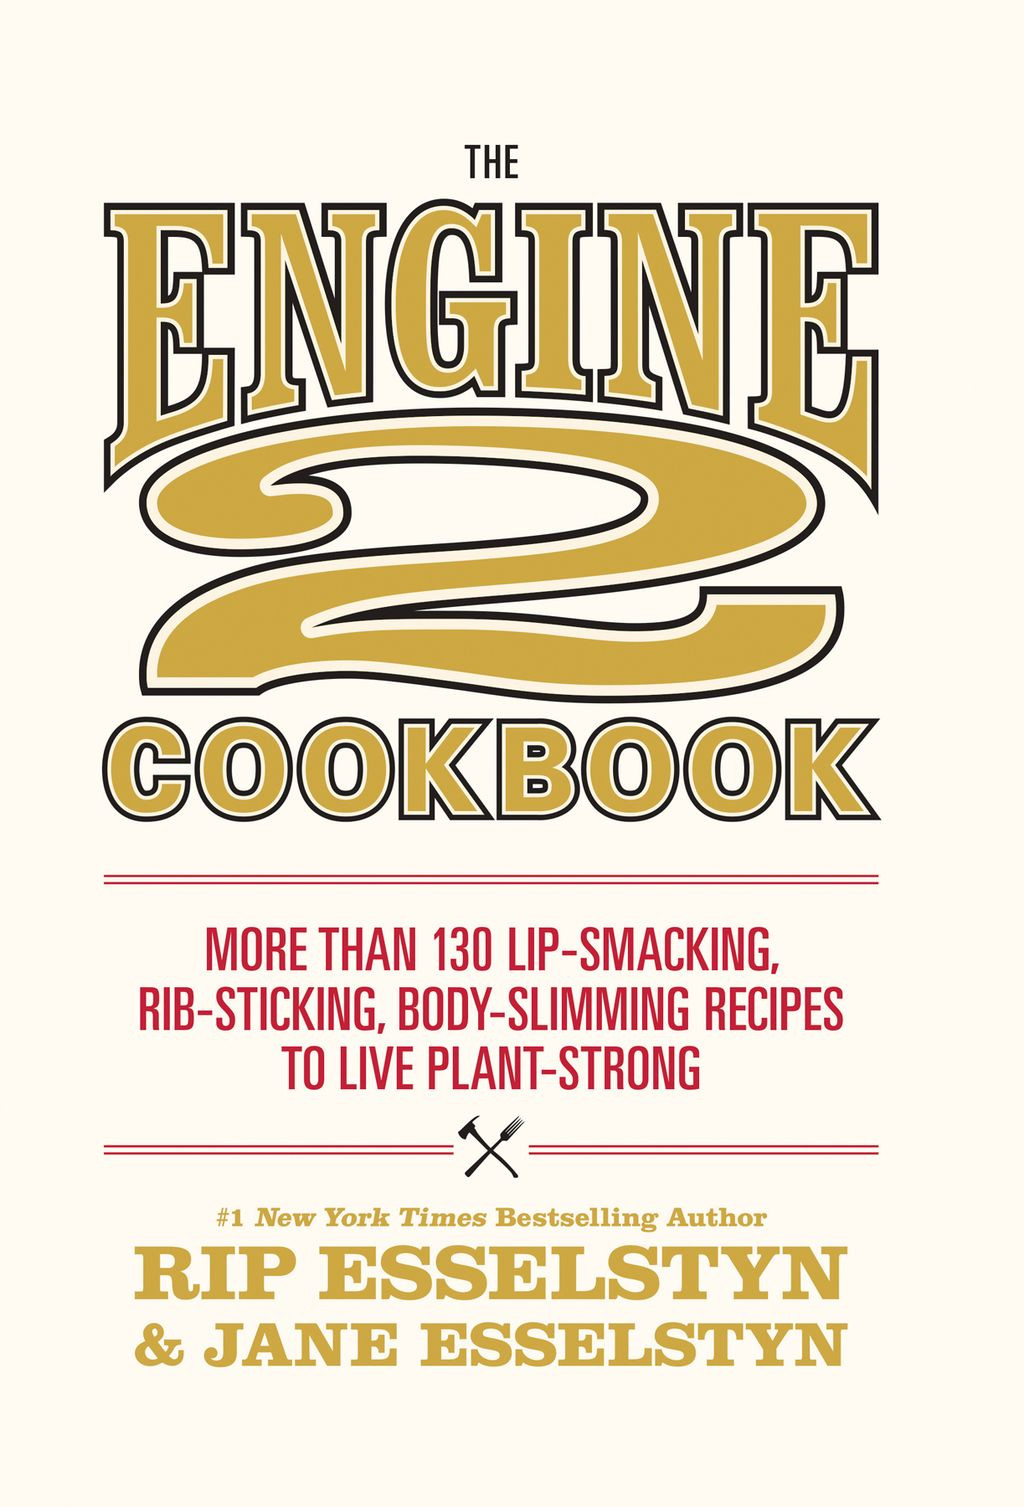 Engine 2 Recipes Rip Esselstyn Plant Based Diet
 The Engine 2 Cookbook eBook With images